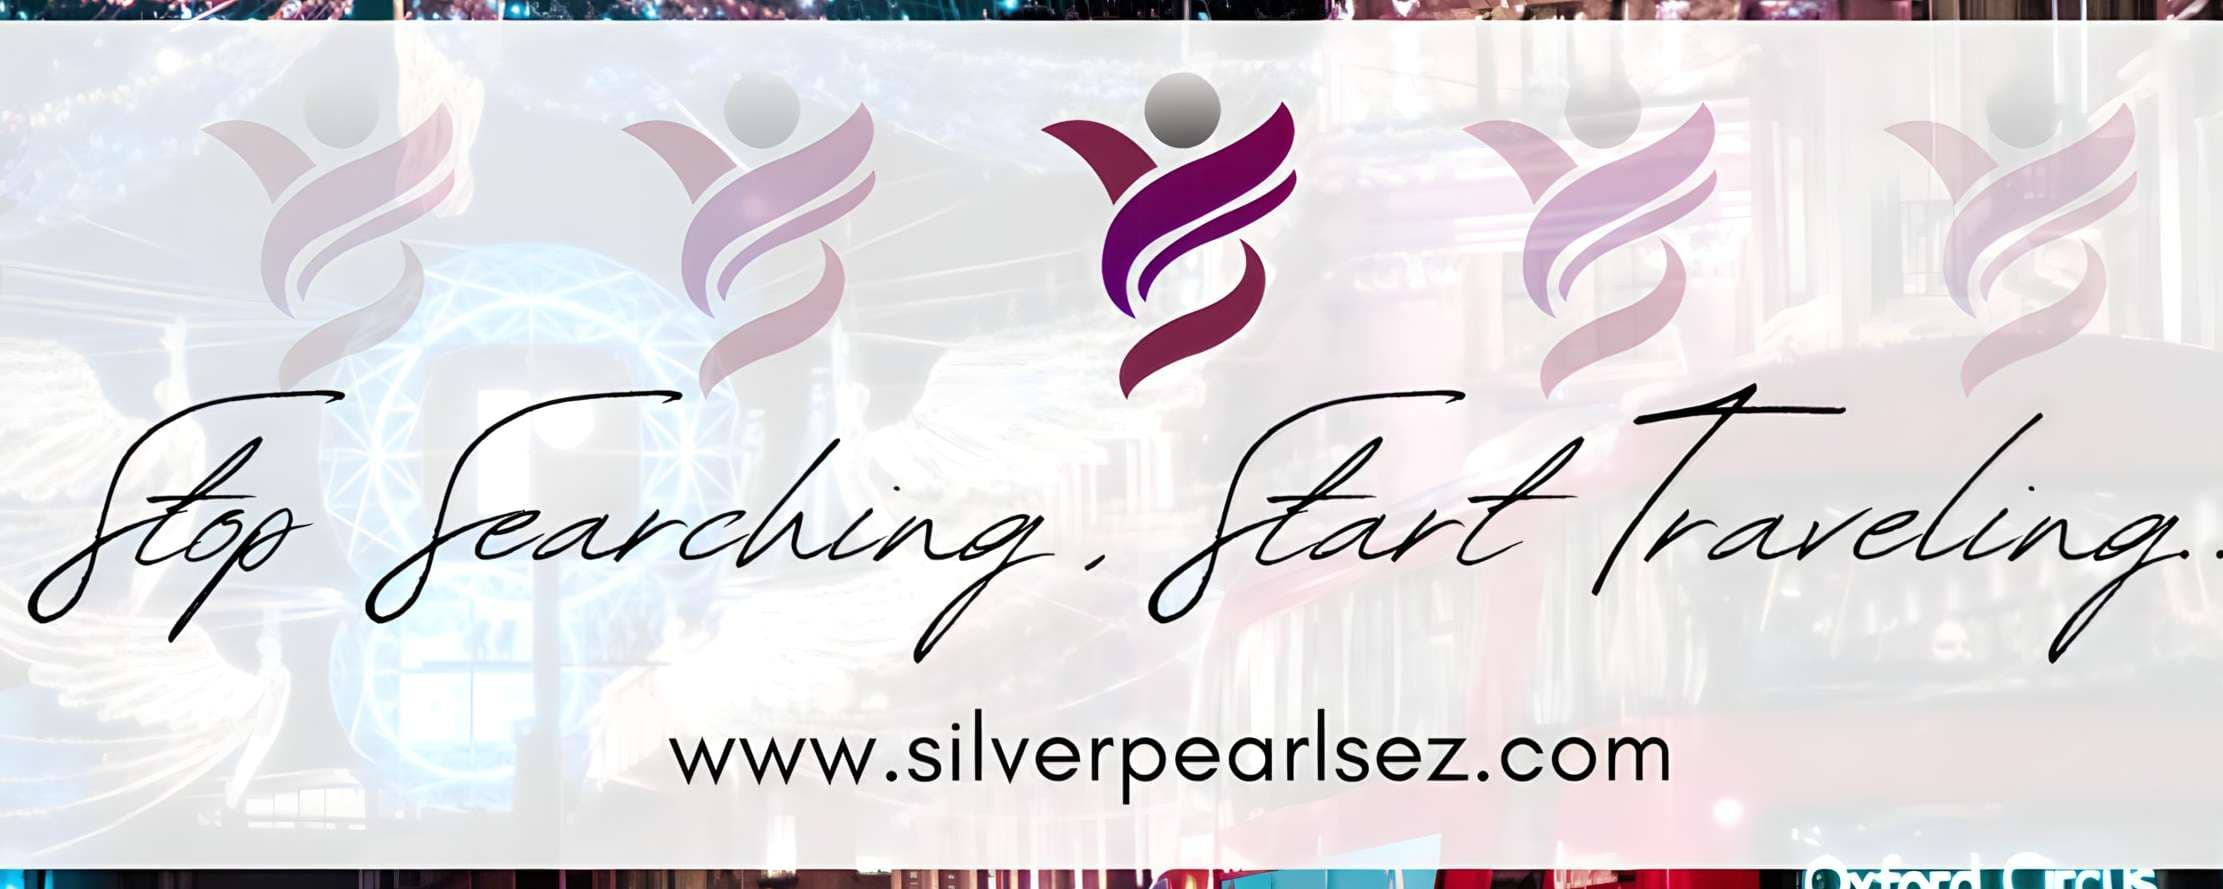 SilverPearl Tours - Travel